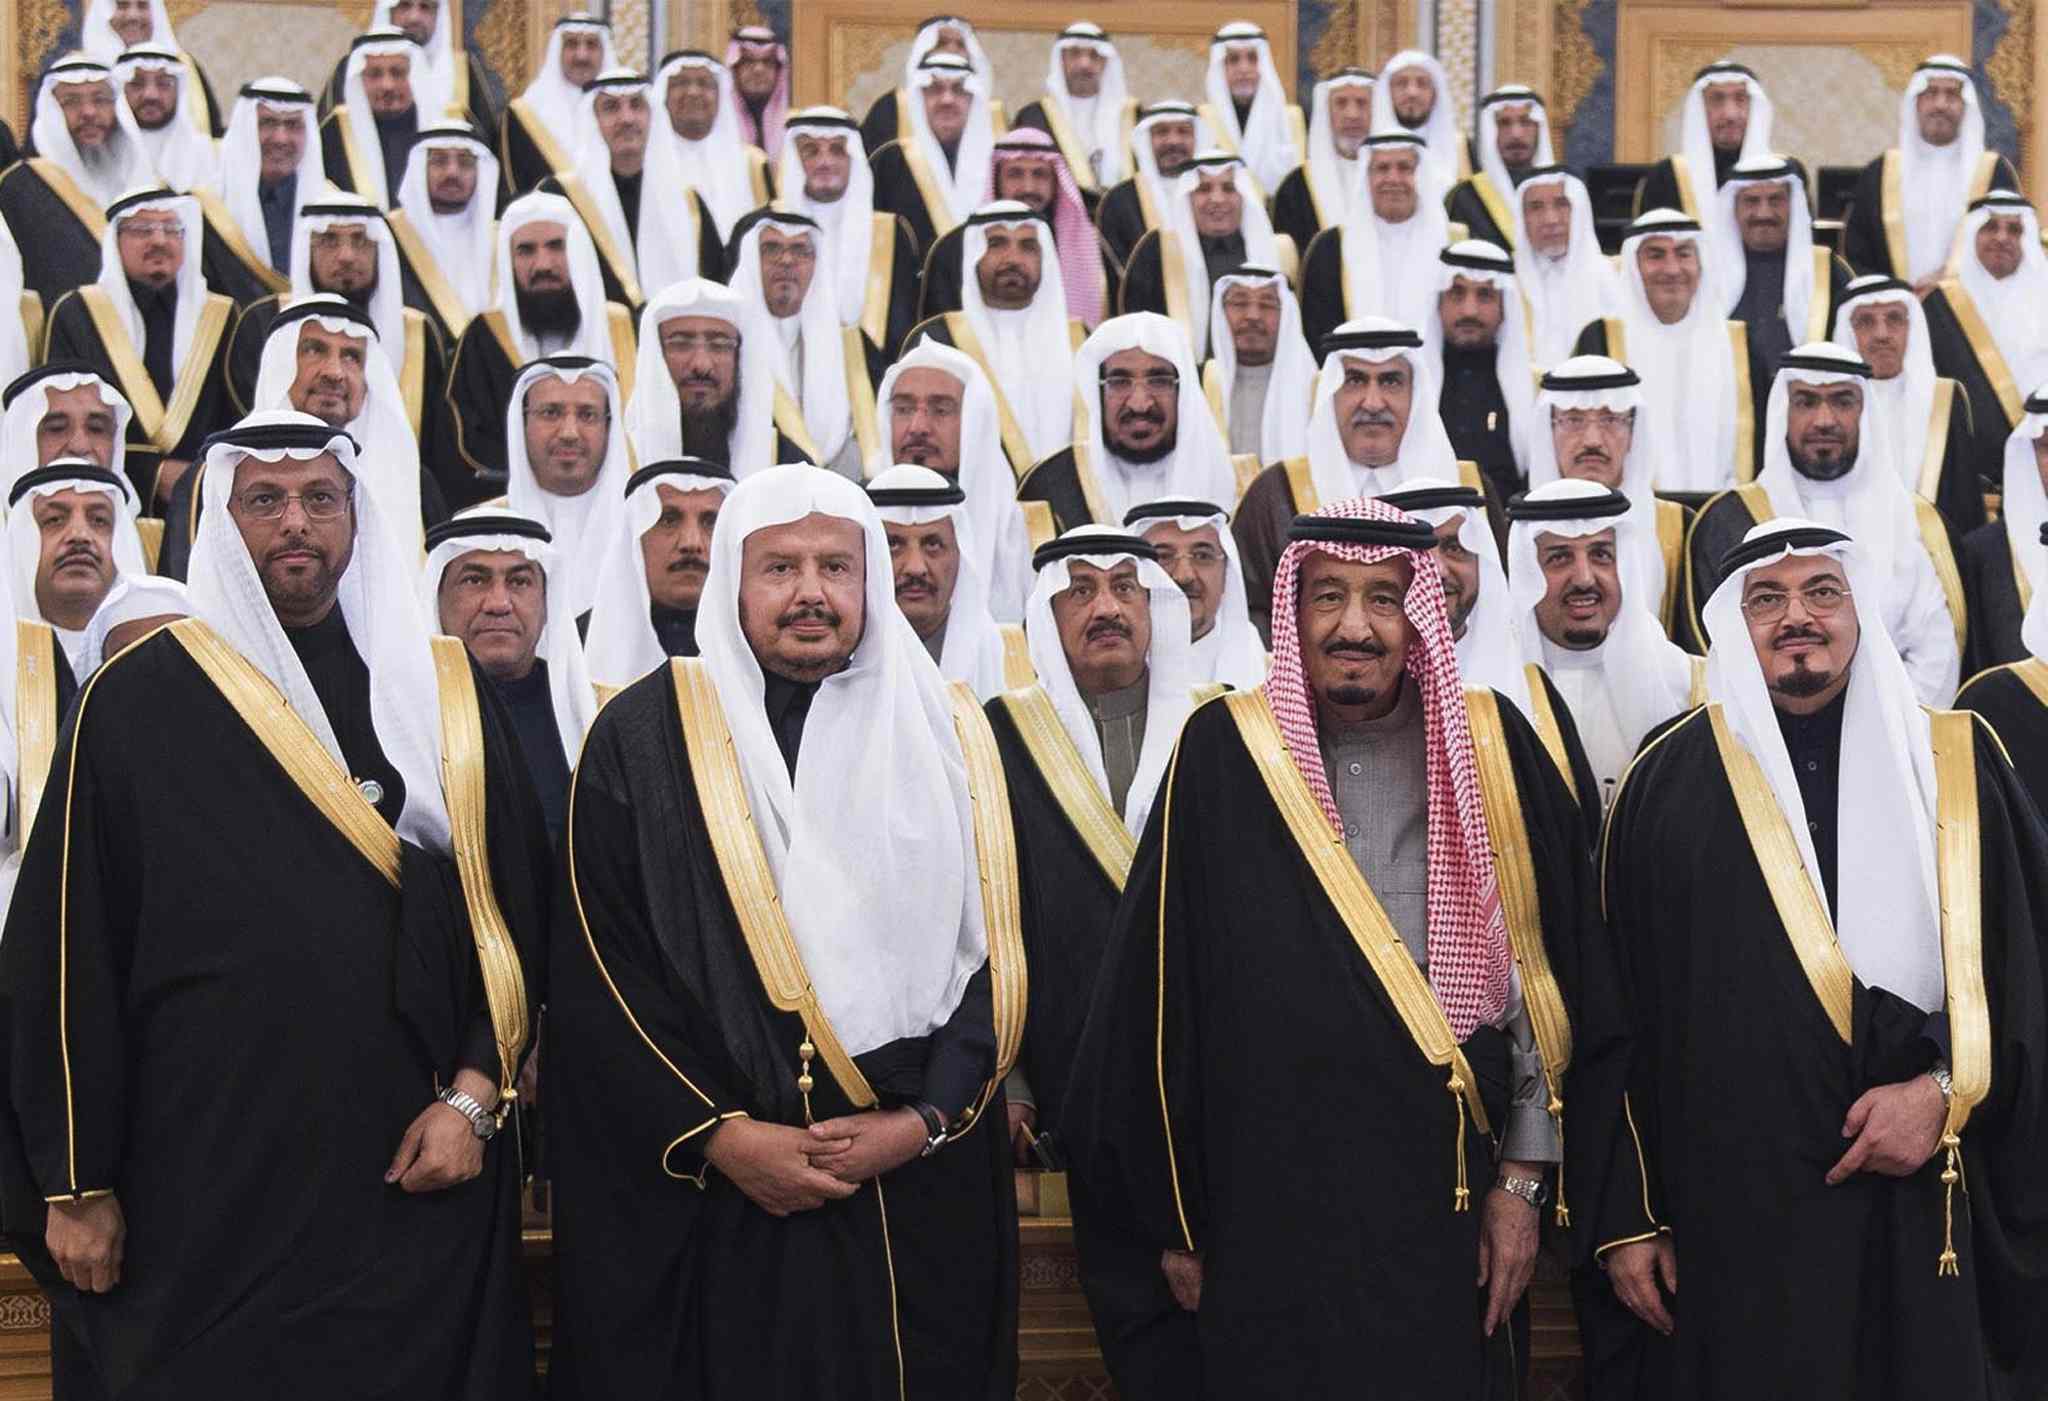 FILE - In this Tuesday, Jan. 6, 2015, file mage released by Saudi Press Agency, SPA, Saudi Arabia's Crown Prince Salman bin Abdulaziz Al Saud, 2nd right first row, poses with Shura members at consultative Shura Council in Riyadh, Saudi Arabia. Saudi Arabia's new monarch isn't wasting time. Since assuming the throne Jan. 23, King Salman has elevated some of his closest relatives and sidelined previous power-brokers, tightened decision-making and promised lavish payouts designed to win early goodwill. (AP Photo/Saudi Press Agency, File)